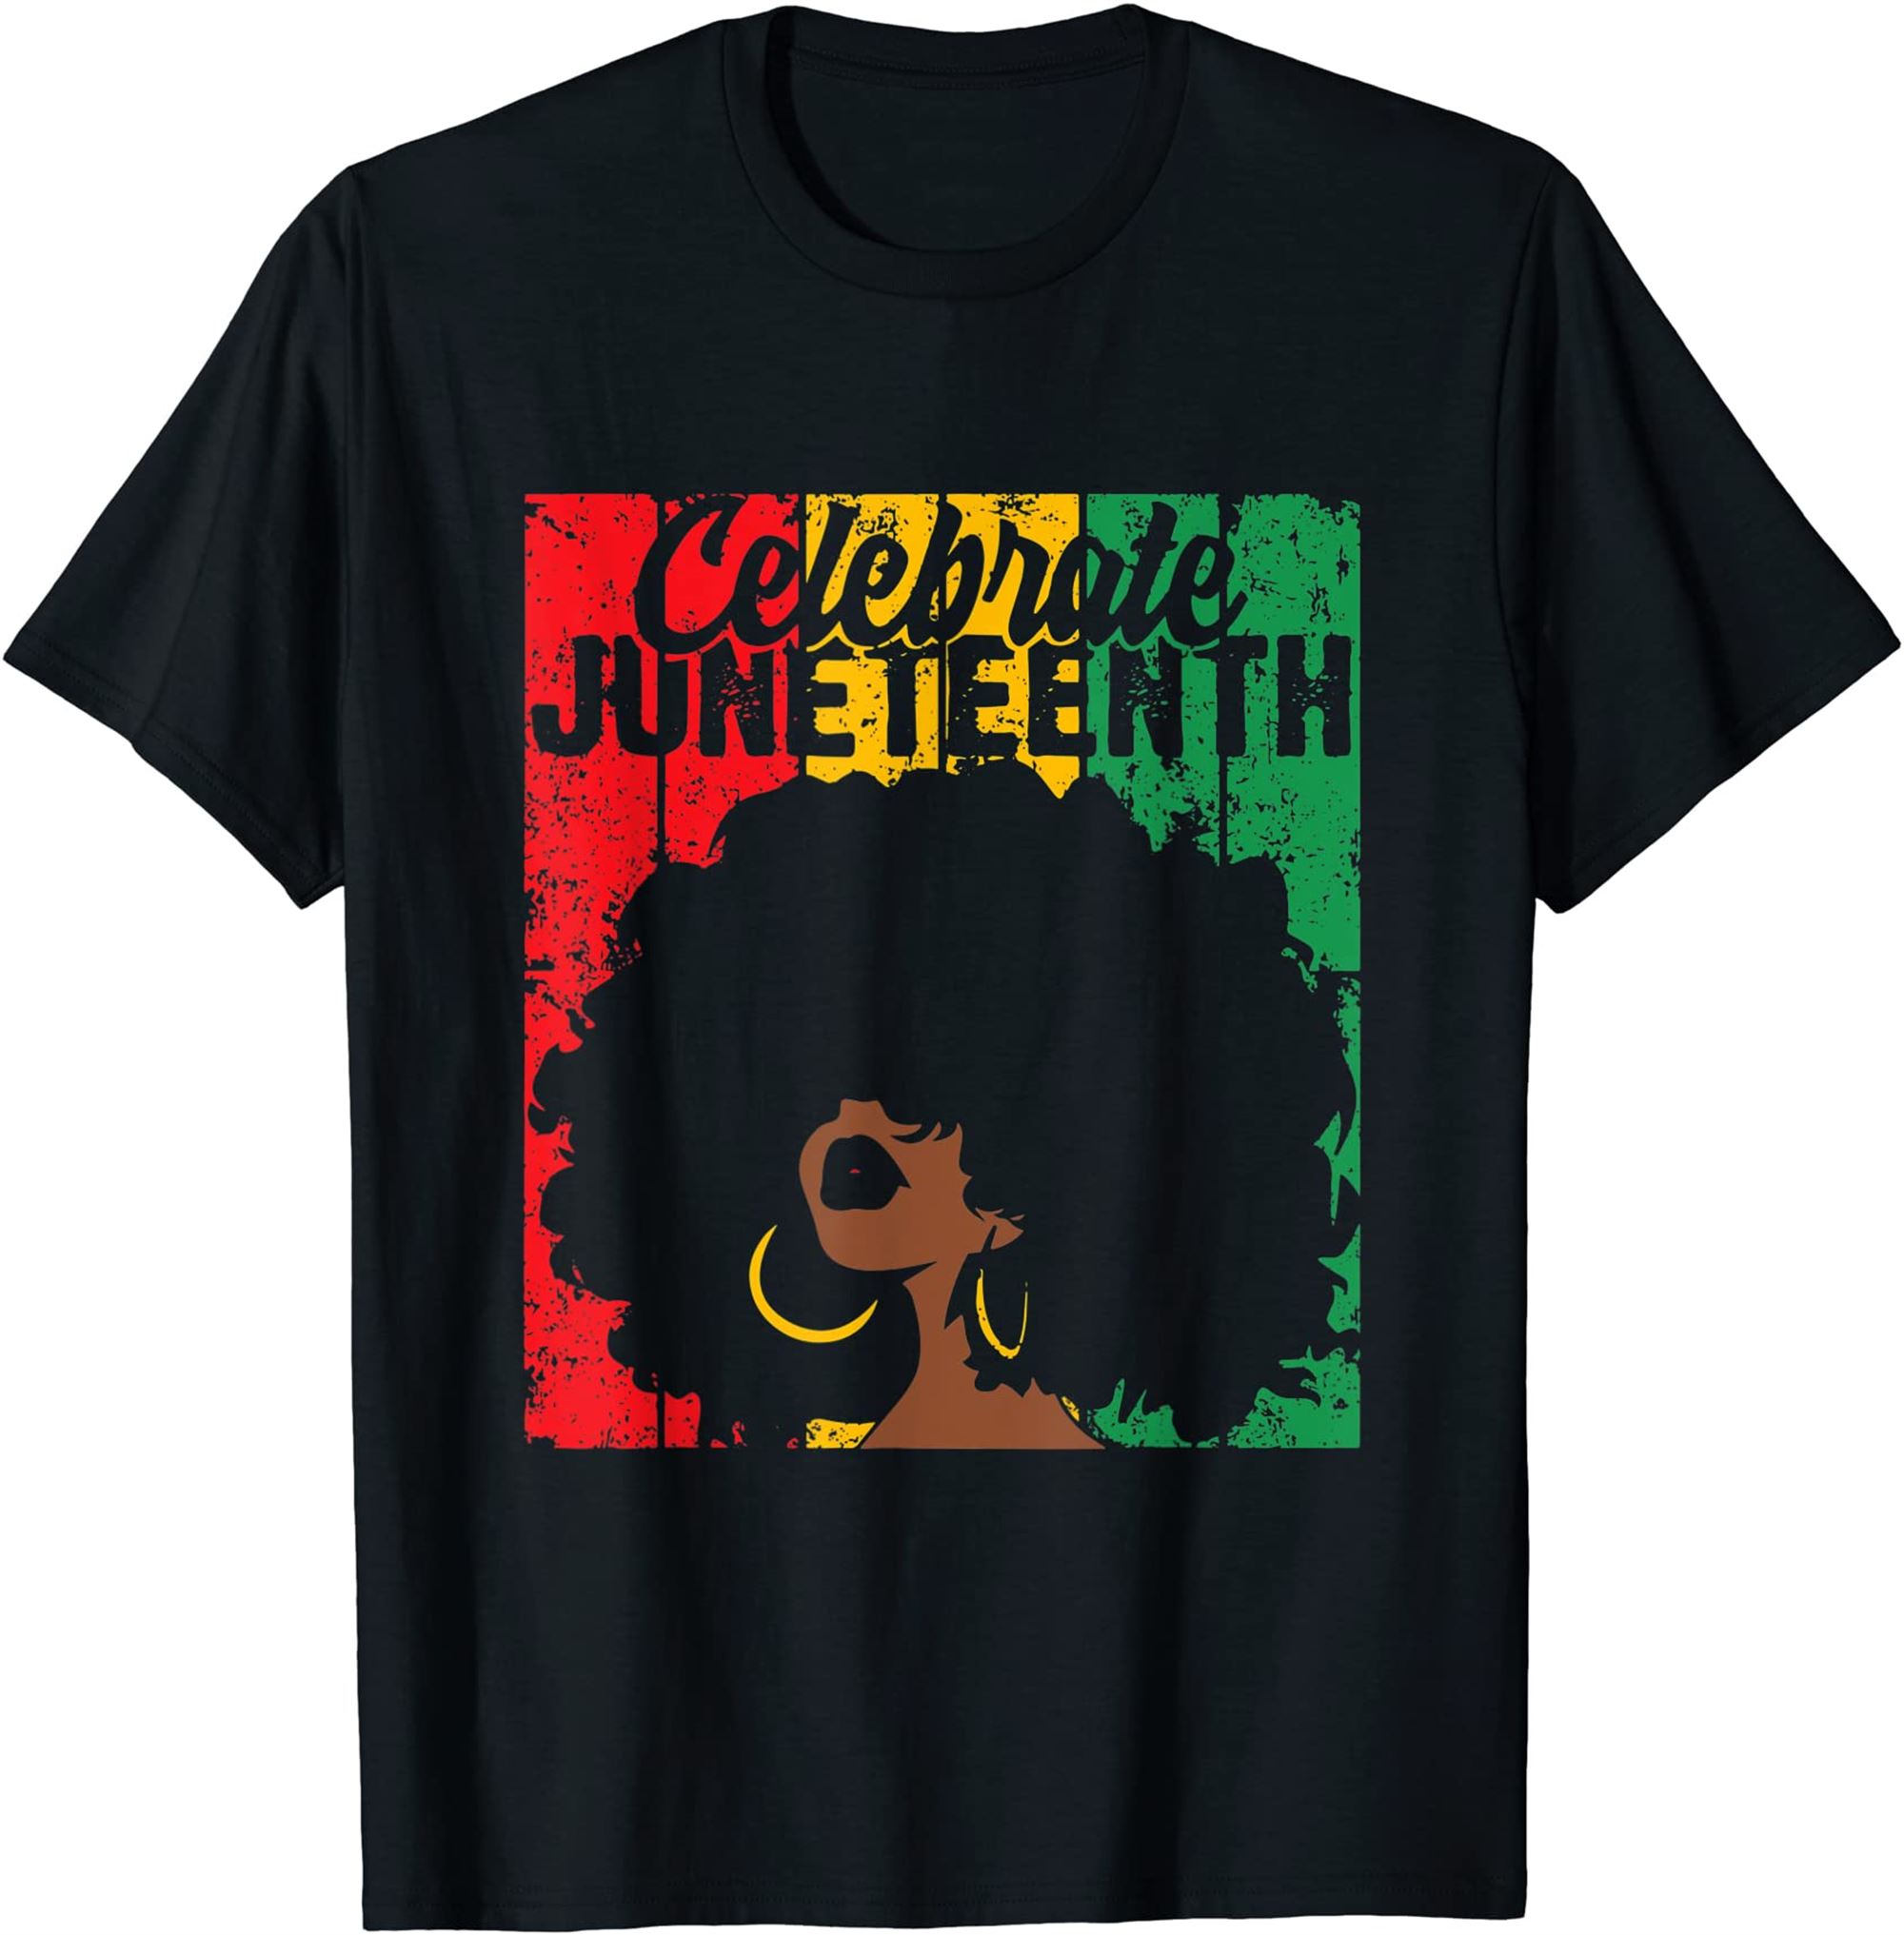 Awesome Messy Bun Juneteenth Celebrate 1865 June 19th T-shirt Size Up To 5xl